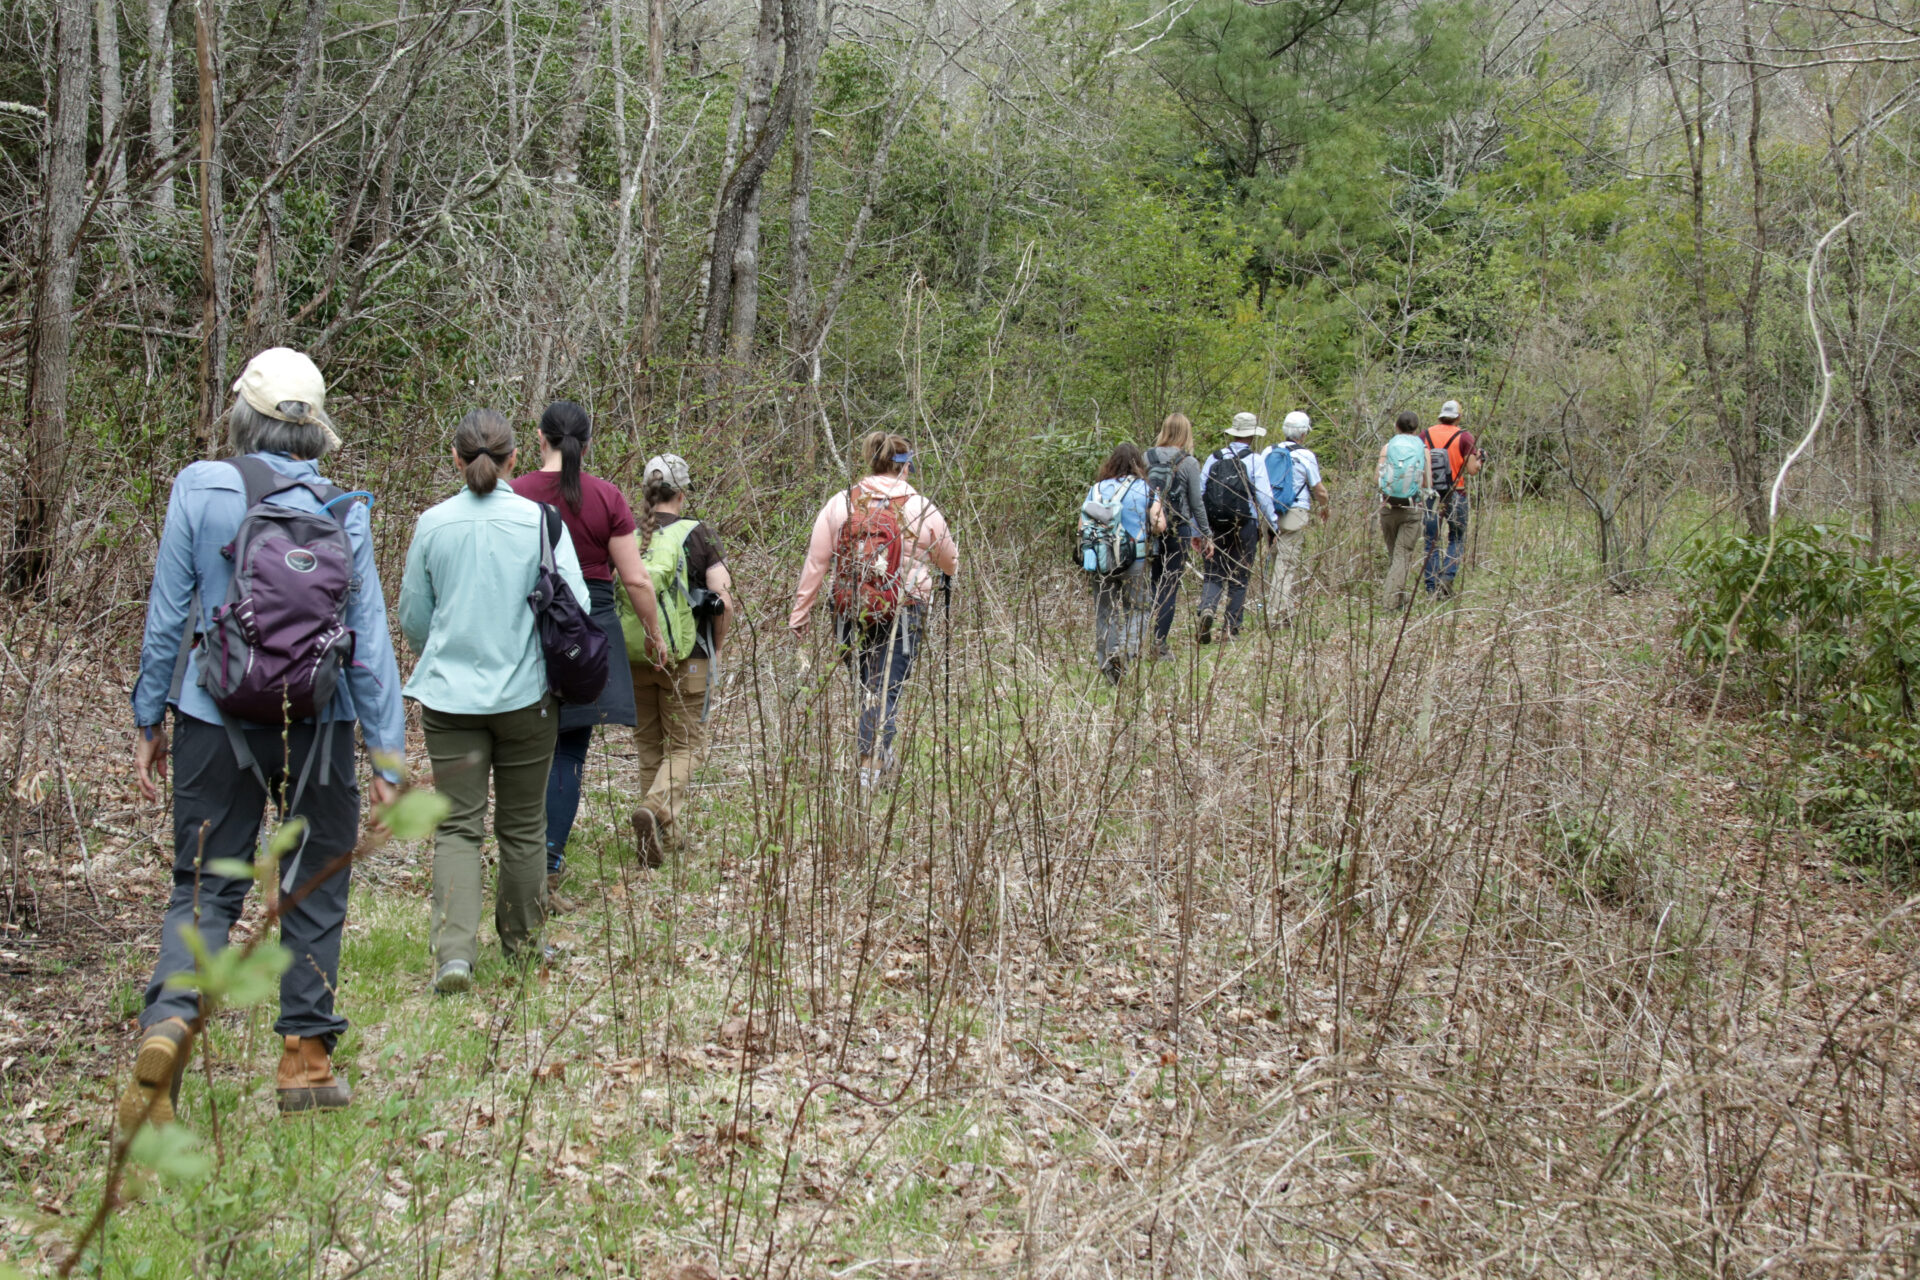 Members head out on a guided hike